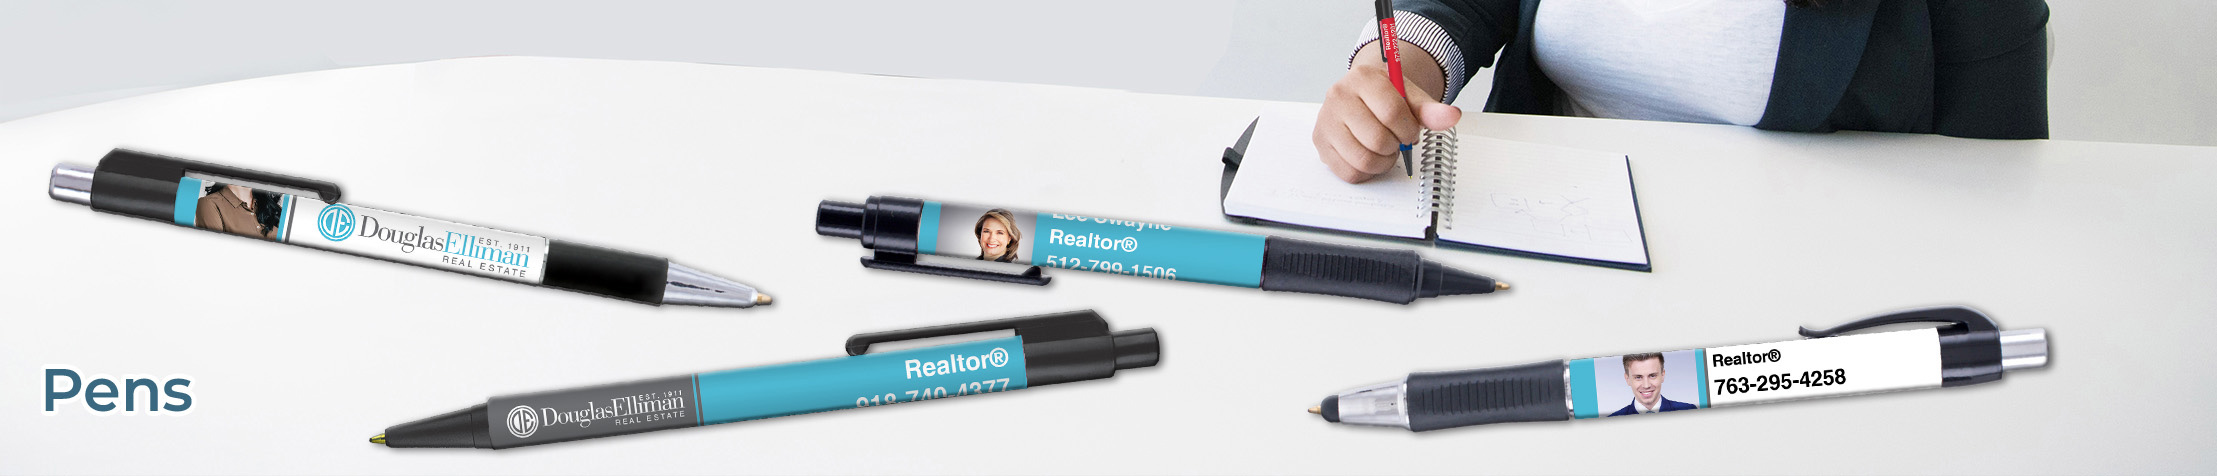 Douglas Elliman Real Estate Personalized Pens - promotional products: Grip Write Pens, Colorama Pens, Vision Touch Pens, and Colorama Grip Pens | BestPrintBuy.com